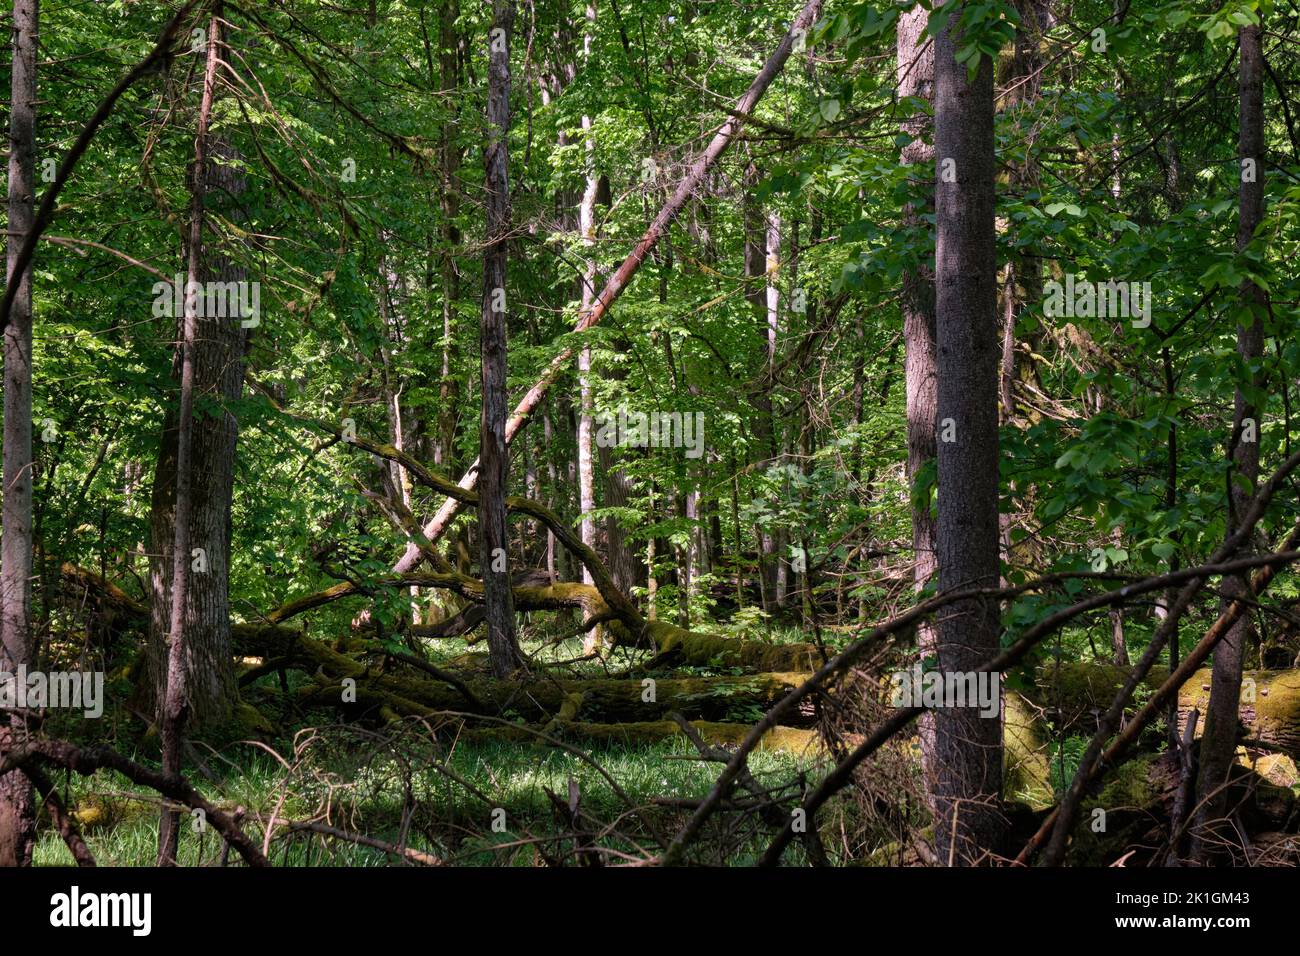 Oak and hornbeam tree deciduous forest in spring with broken oak tree, Bialowieza Forest, Poland, Europe Stock Photo